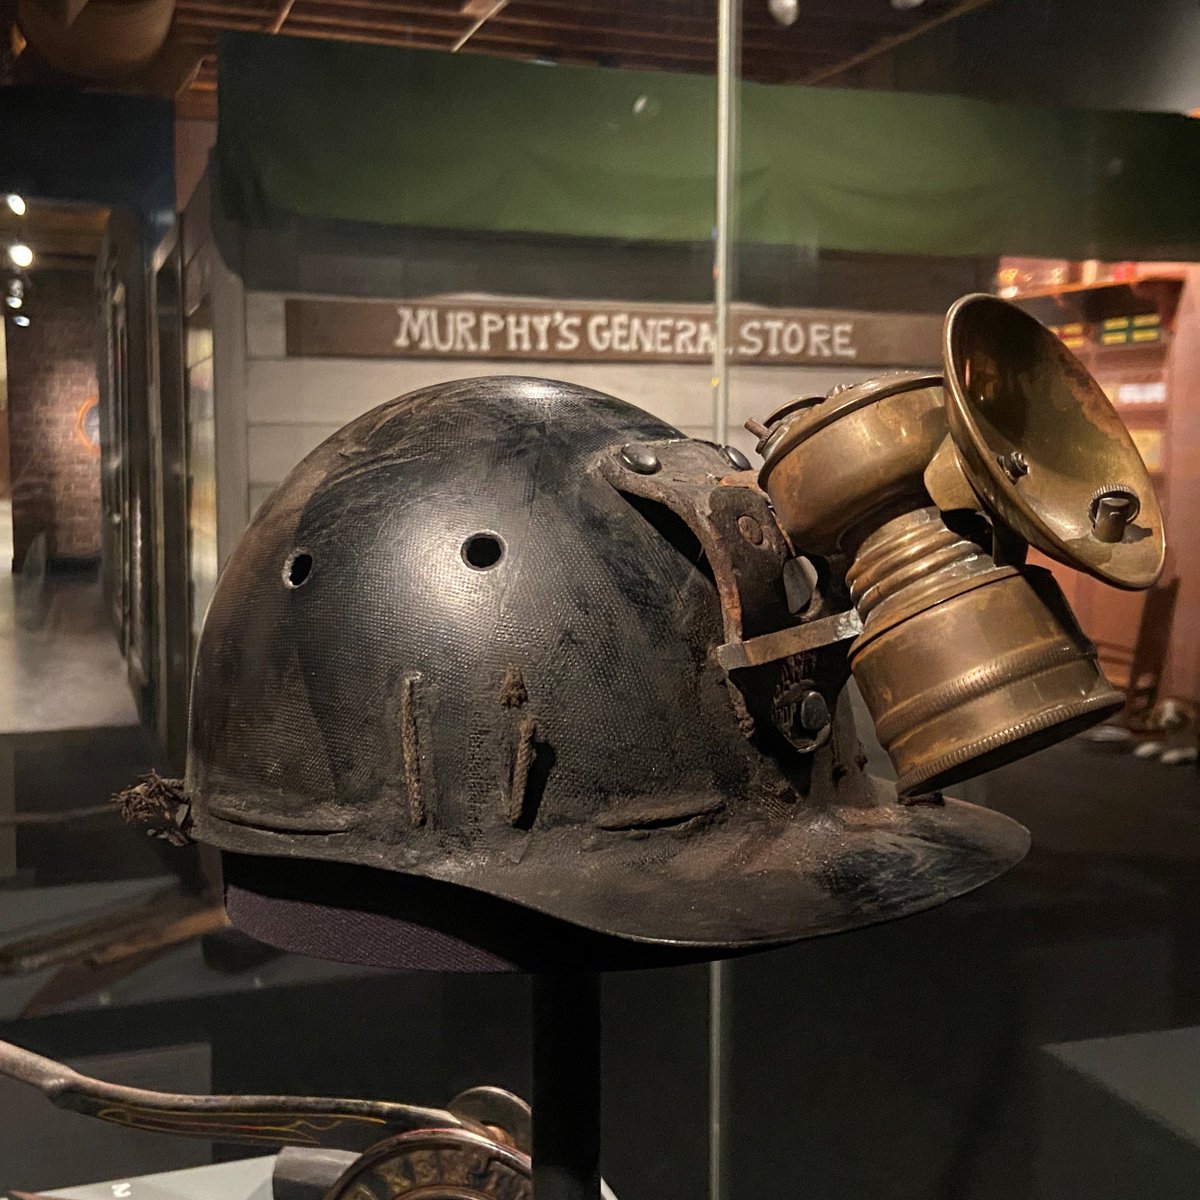 After some renovations and additions to our exhibit we are proud to announce that we have reopened The Commonwealth: Divided We Fall exhibit! Come check out The Commonwealth today at the Frazier, where the world meets Kentucky.